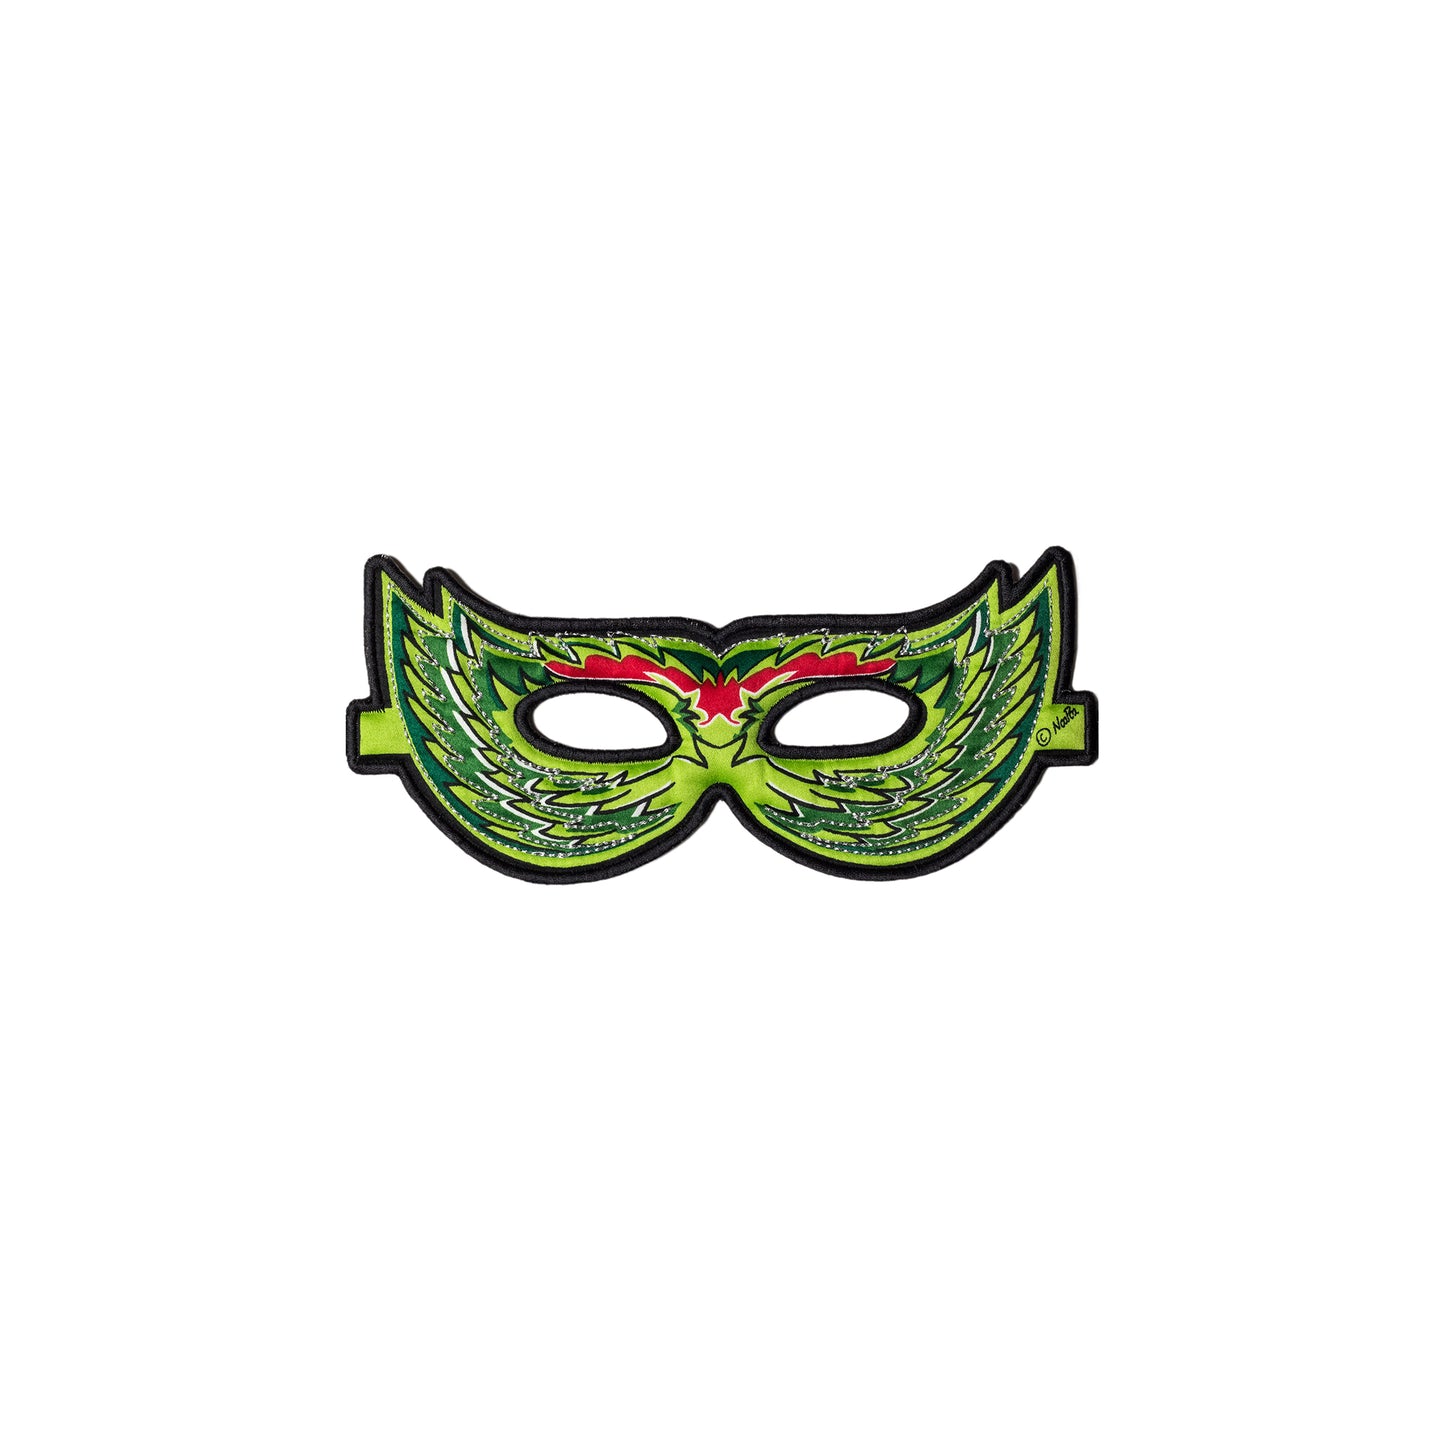 FANCIFUL FABRIC BIRD MASK in eco-friendly cotton gift bag